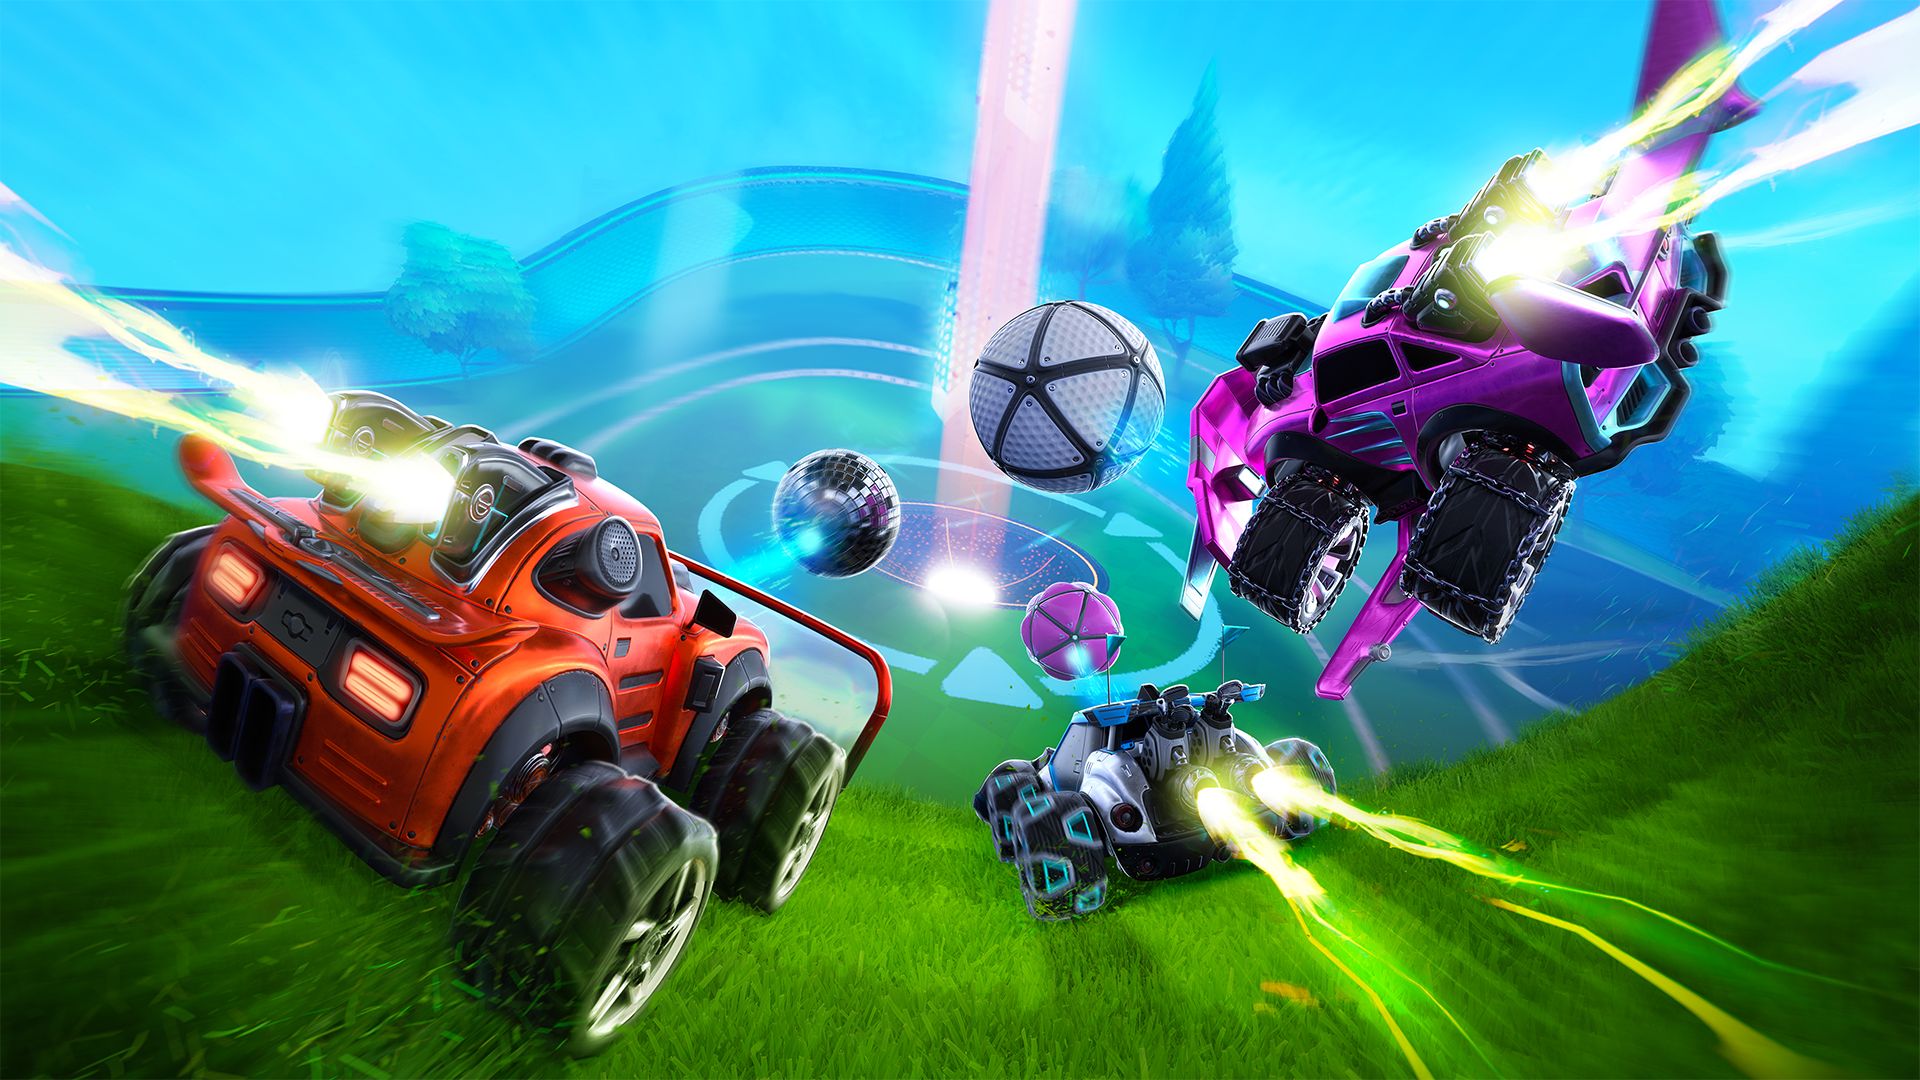 Impressions of Turbo Golf Racing, the new concept inspired by Rocket League